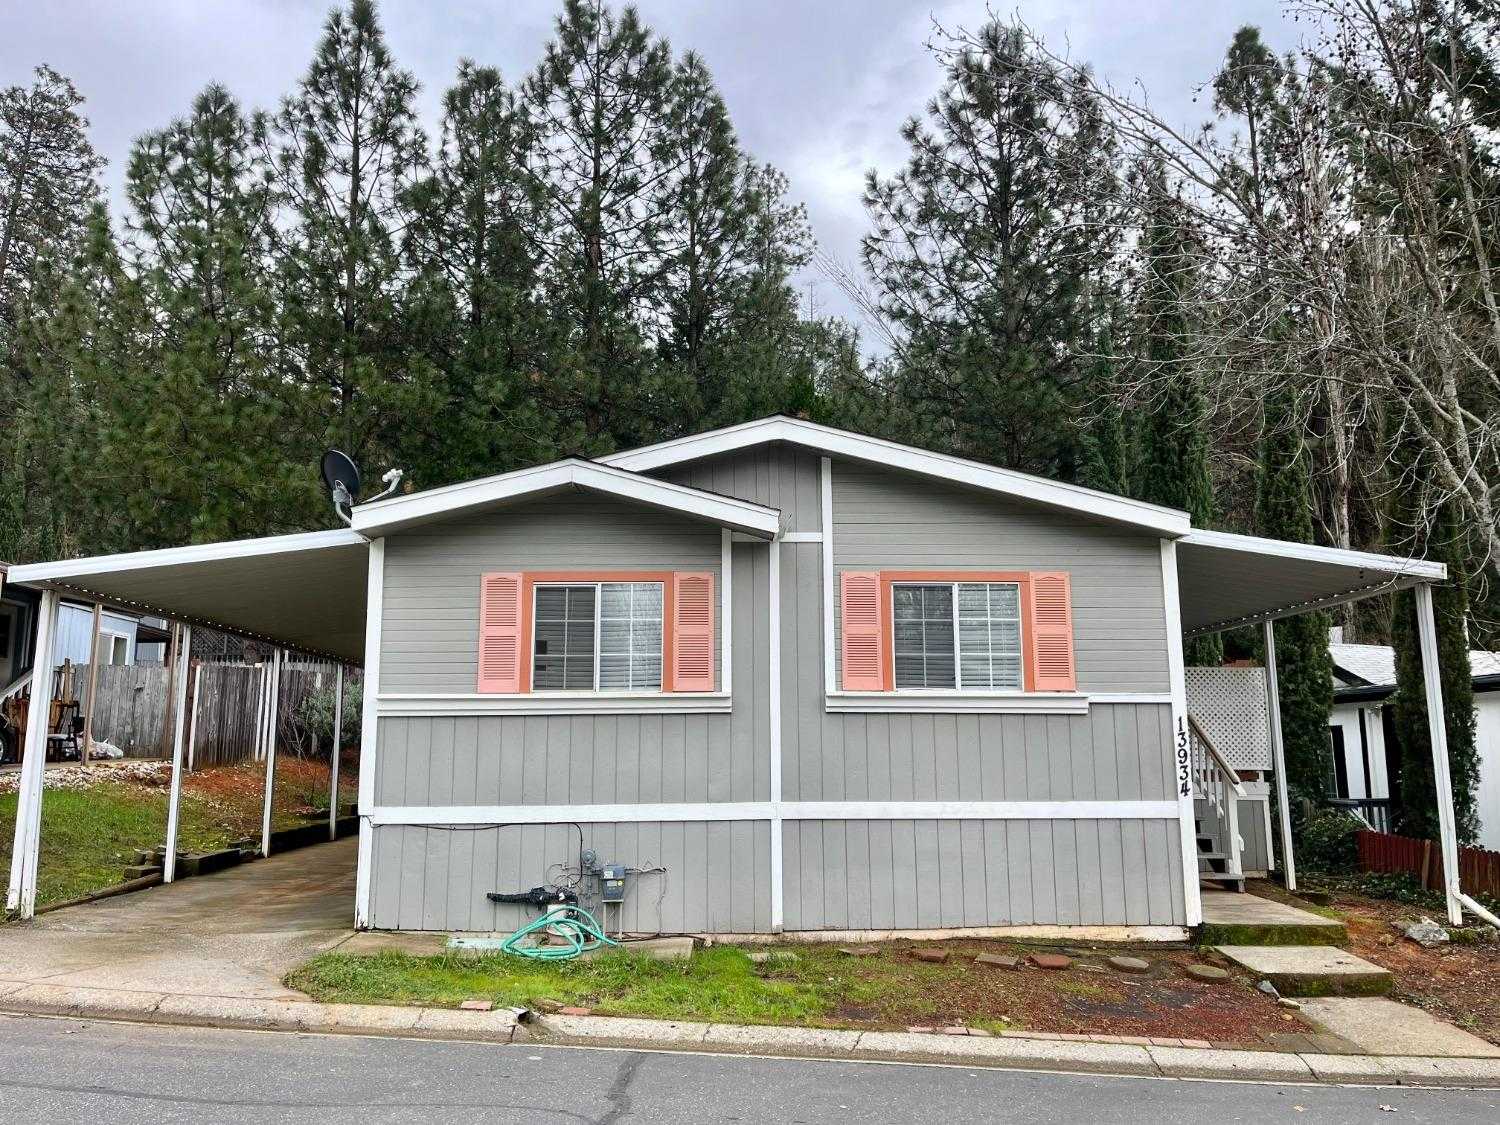 $109,000 - 3Br/2Ba -  for Sale in Grass Valley